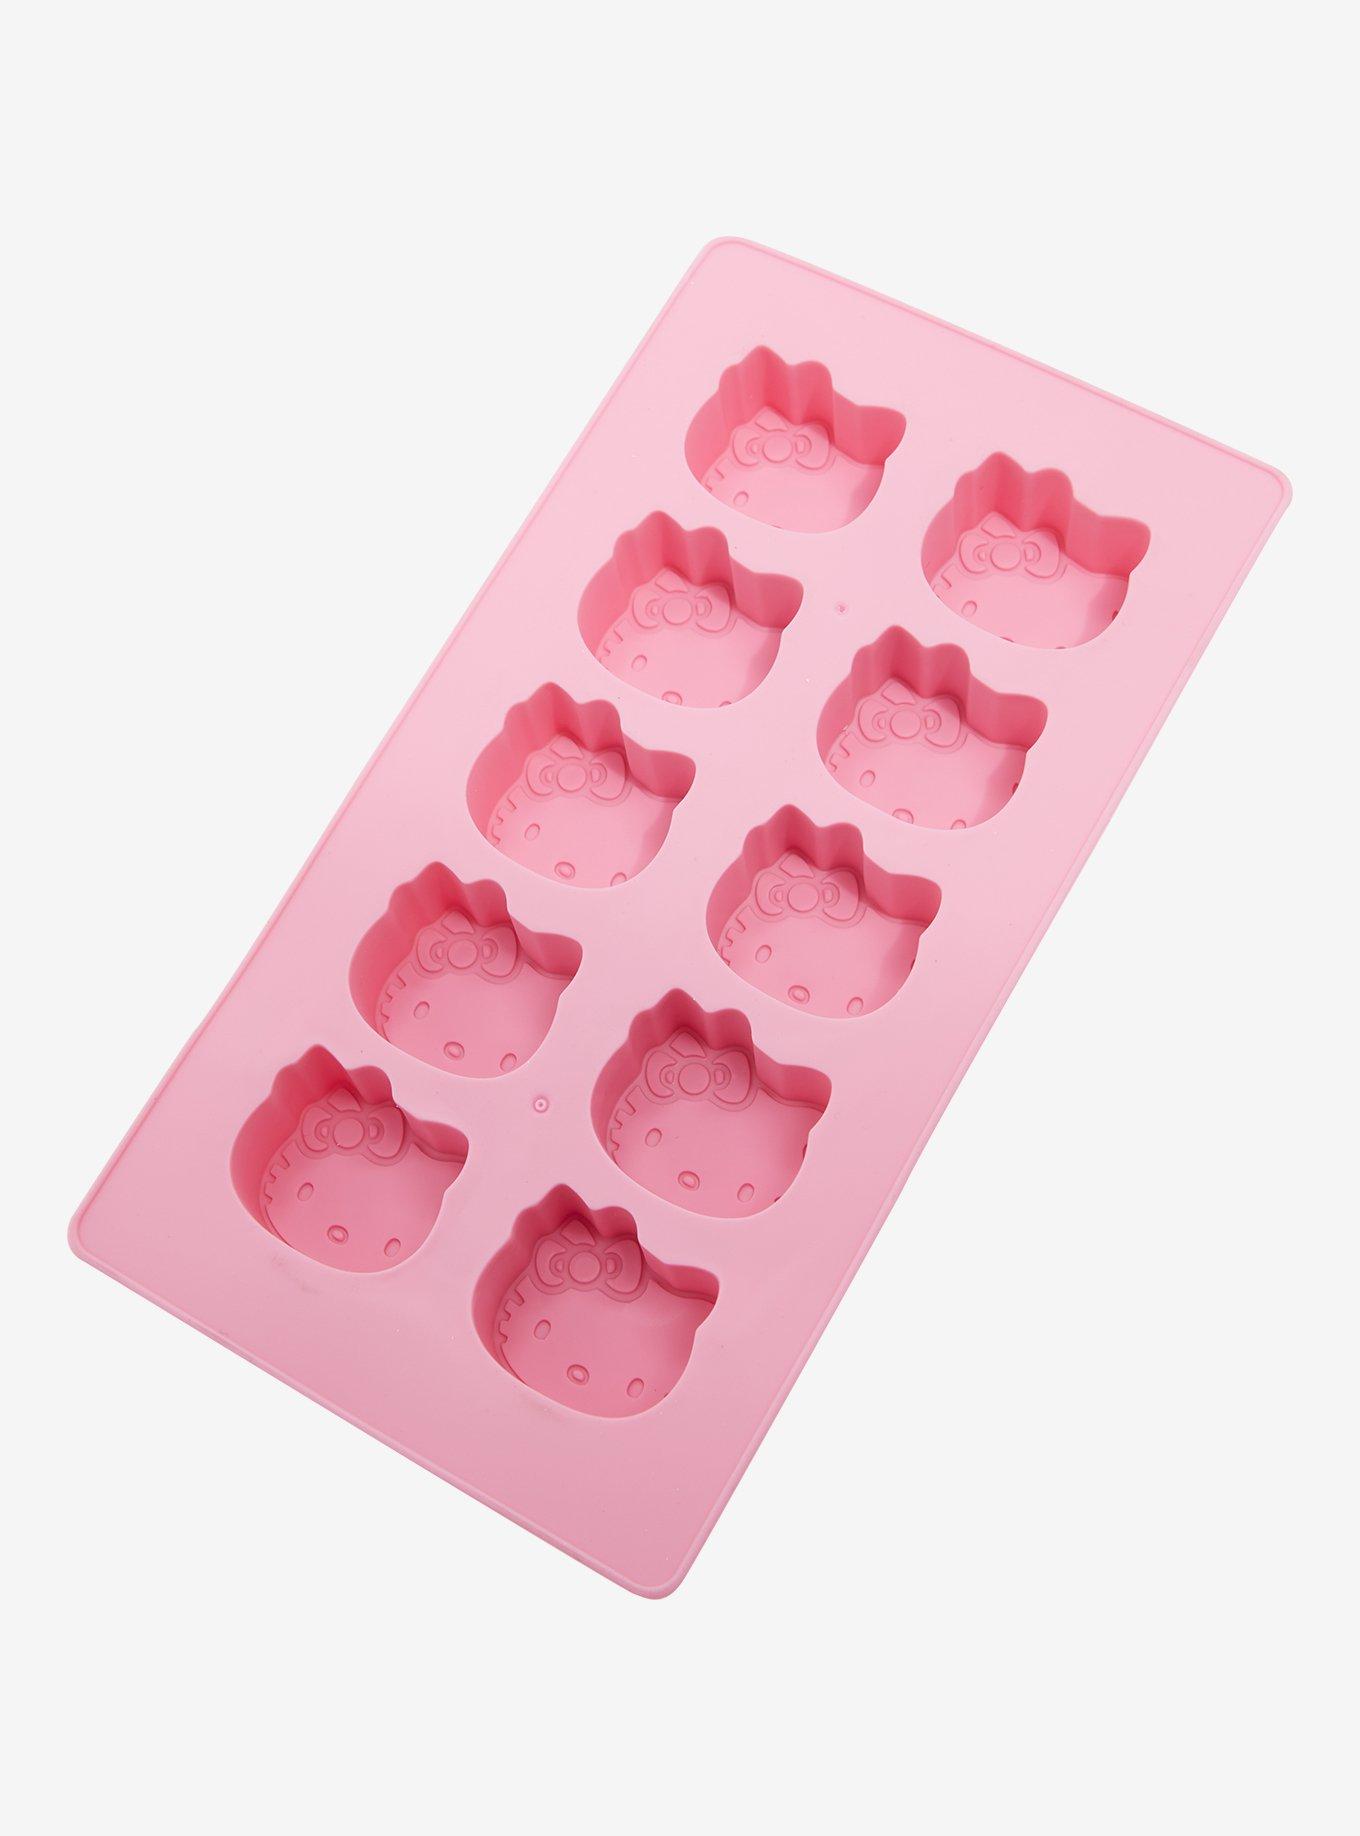 Star Wars - Universe - Ice Cube Tray